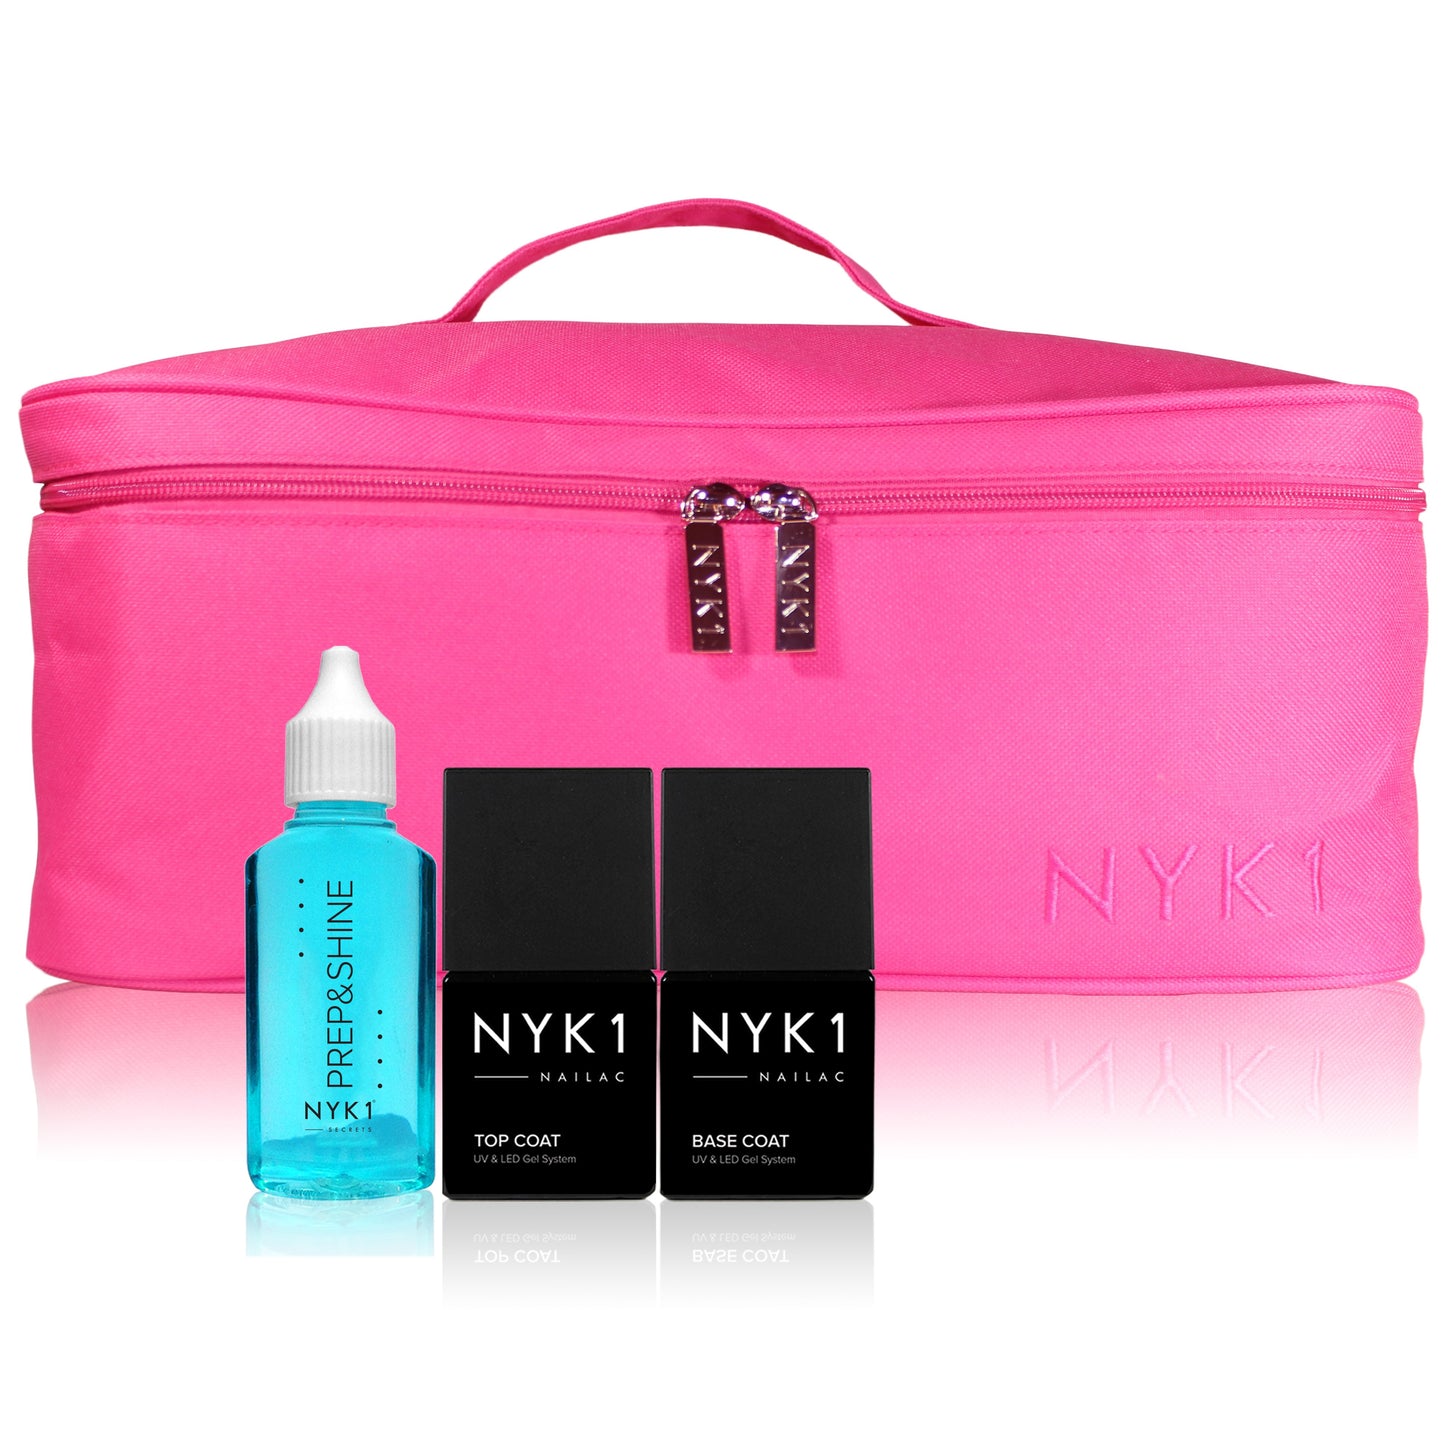 Beauty Vanity Bag in a Gift Set from NYK1